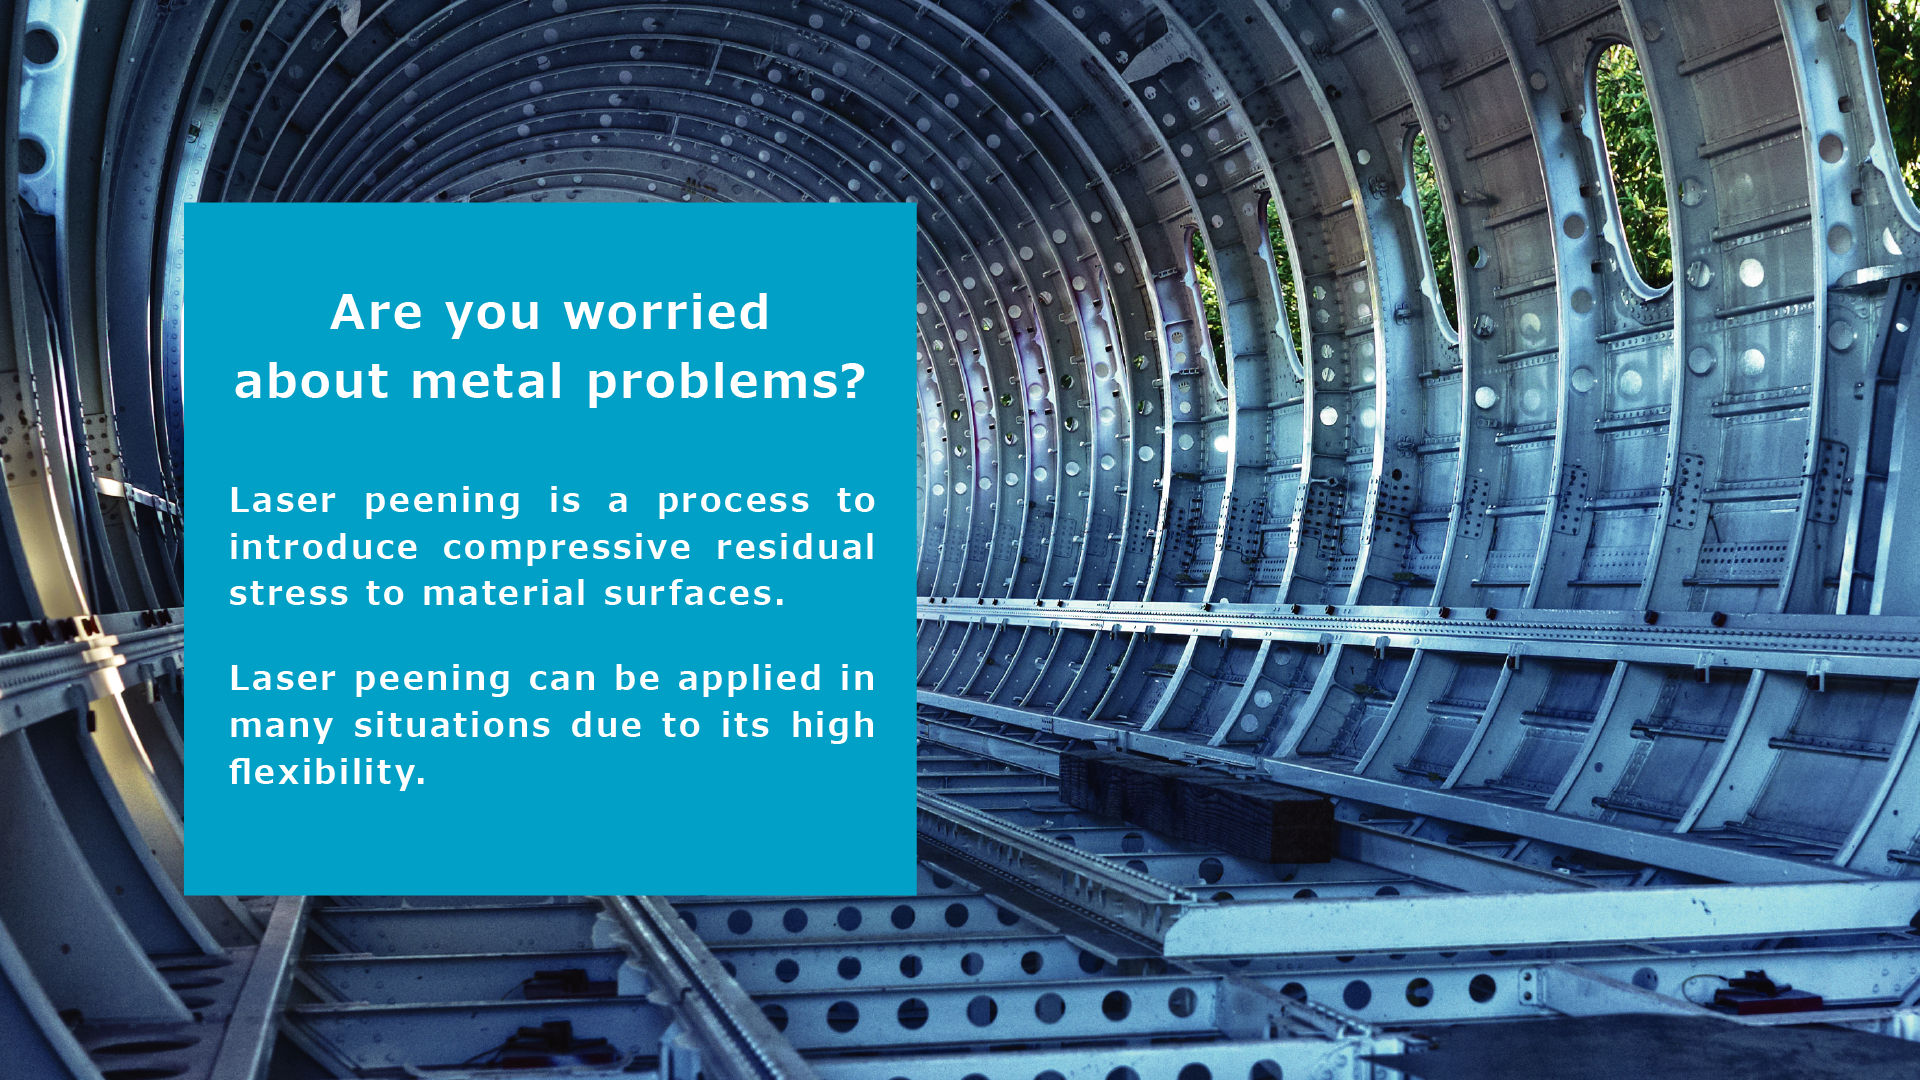 Are you worried about metal problems?